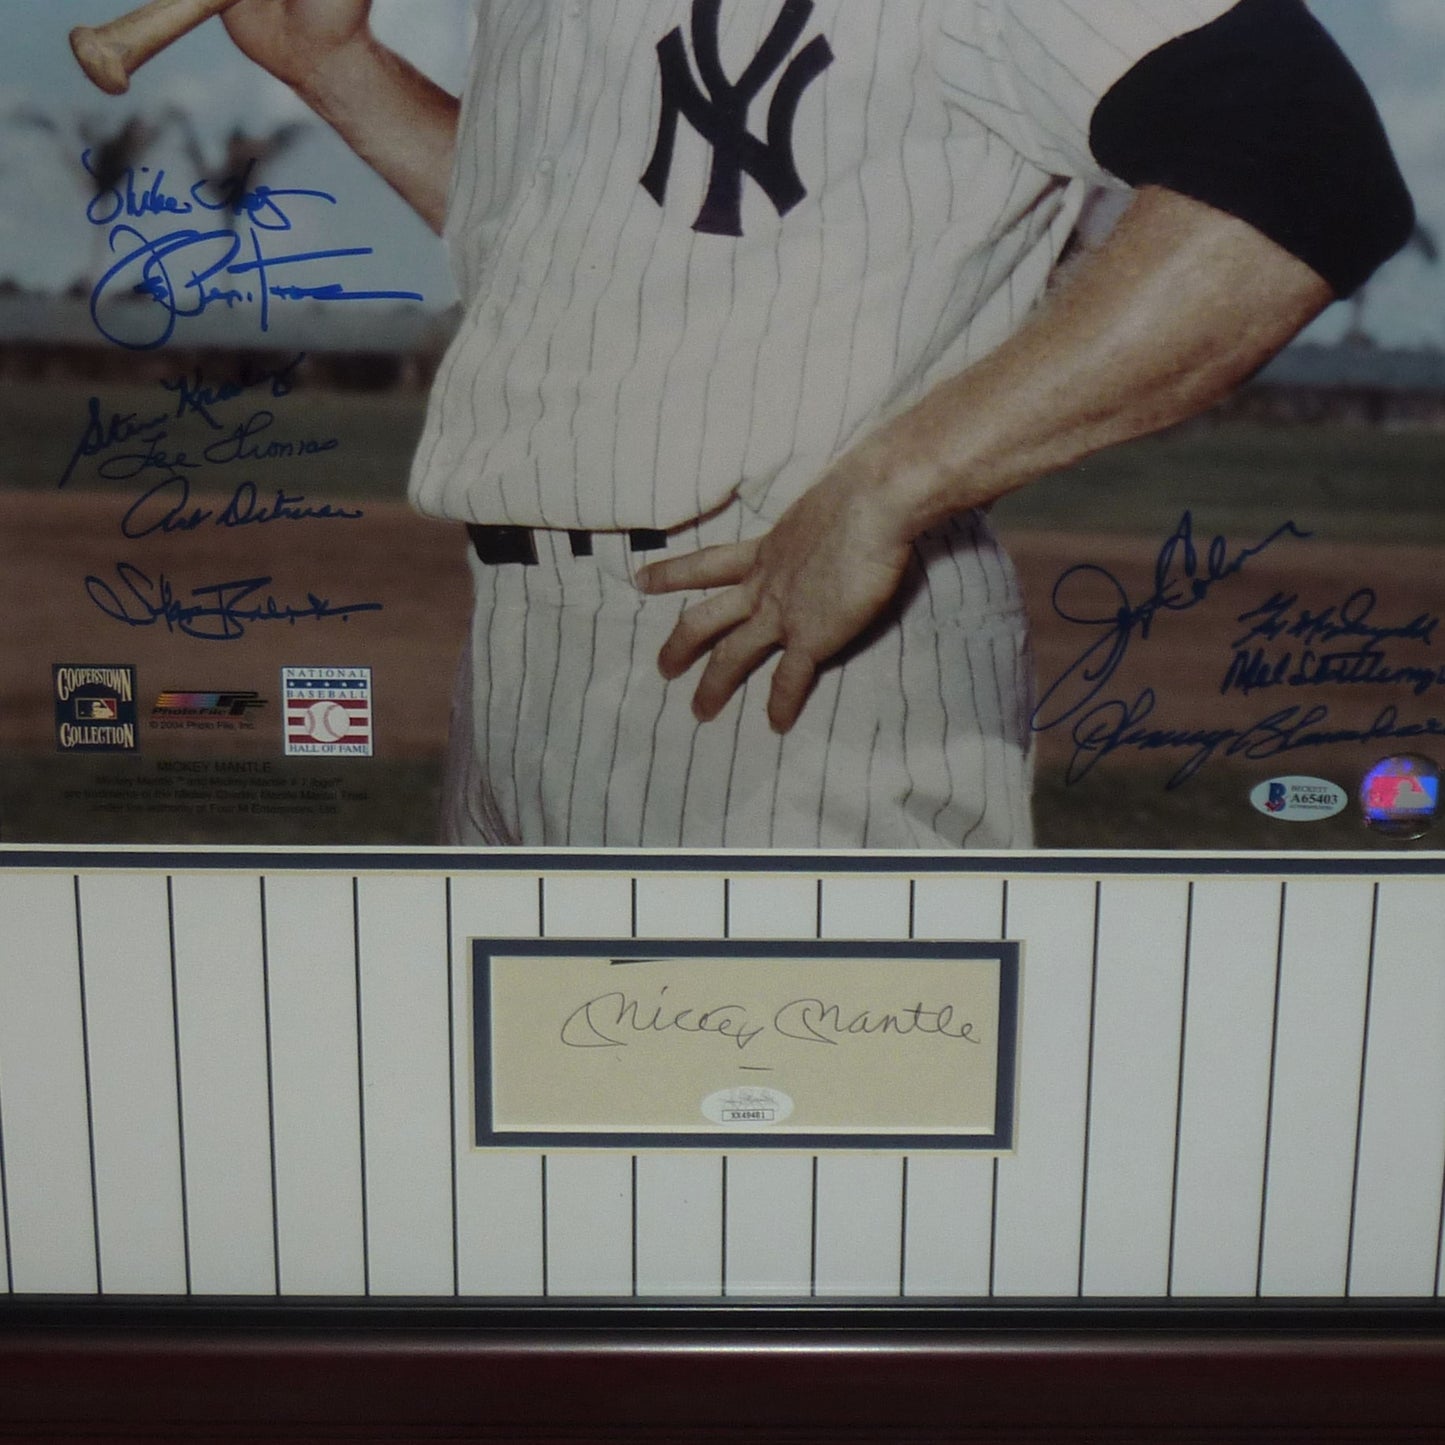 New York Yankees Legends Autographed Mickey Mantle Deluxe Framed 16x20 Photo with Mantle Autograph - JSA